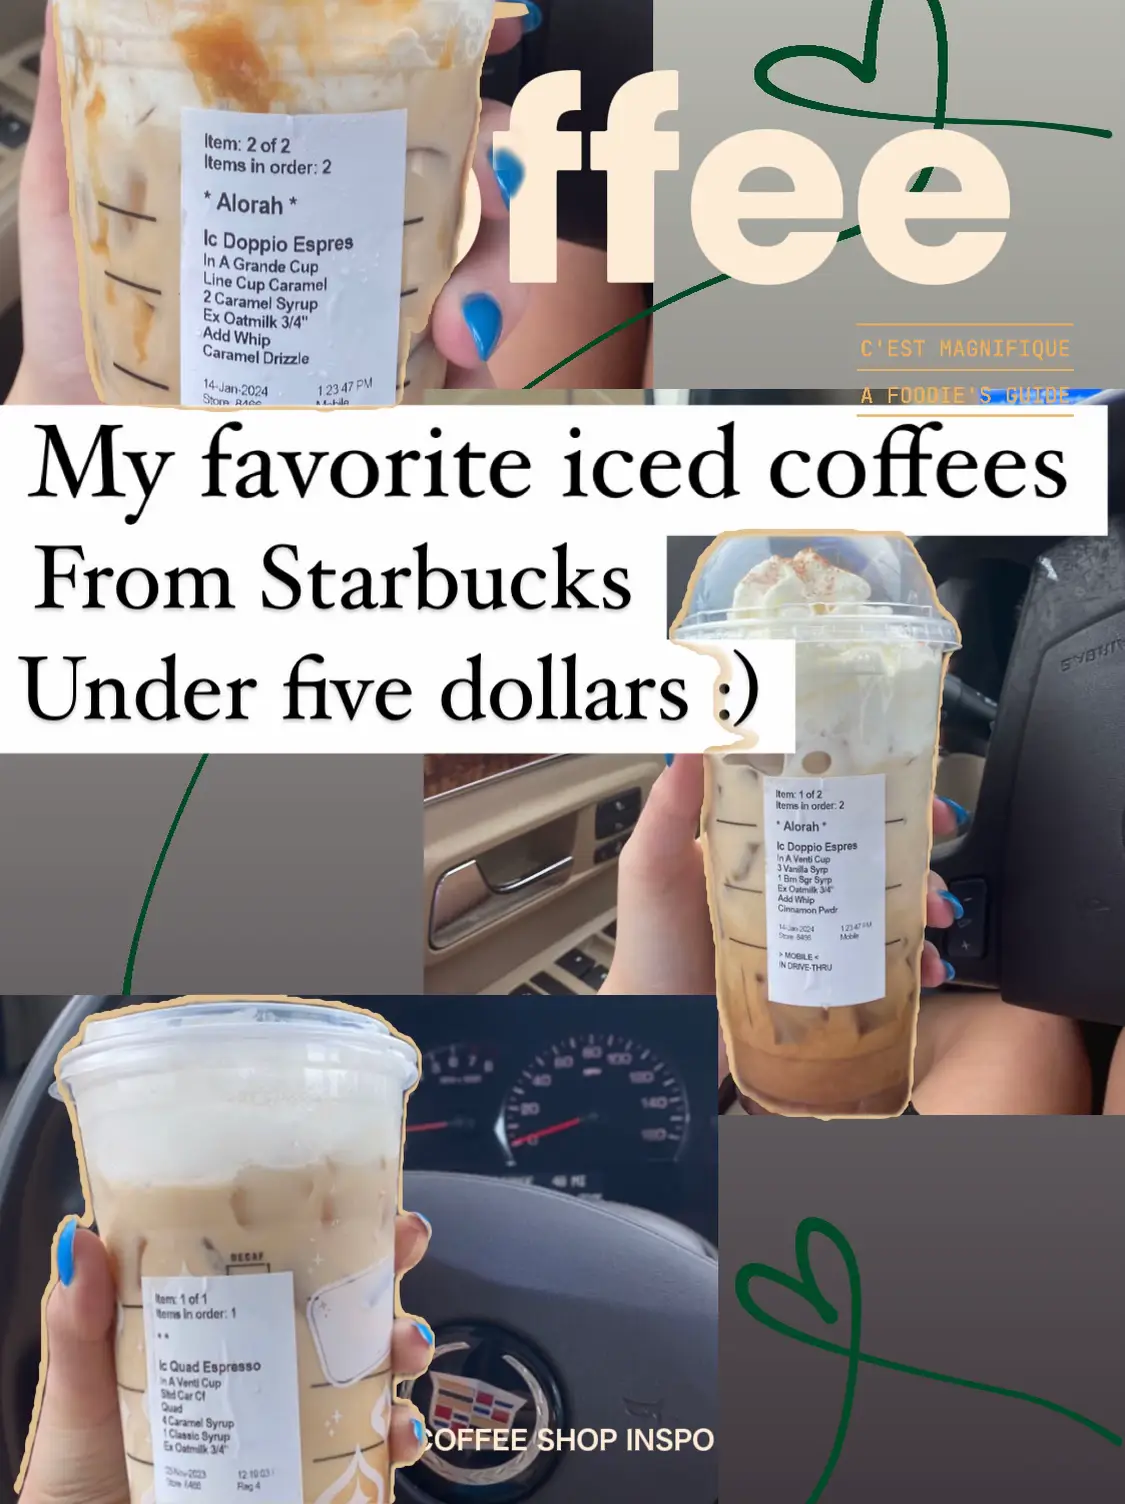  A collage of Starbucks iced coffee drinks